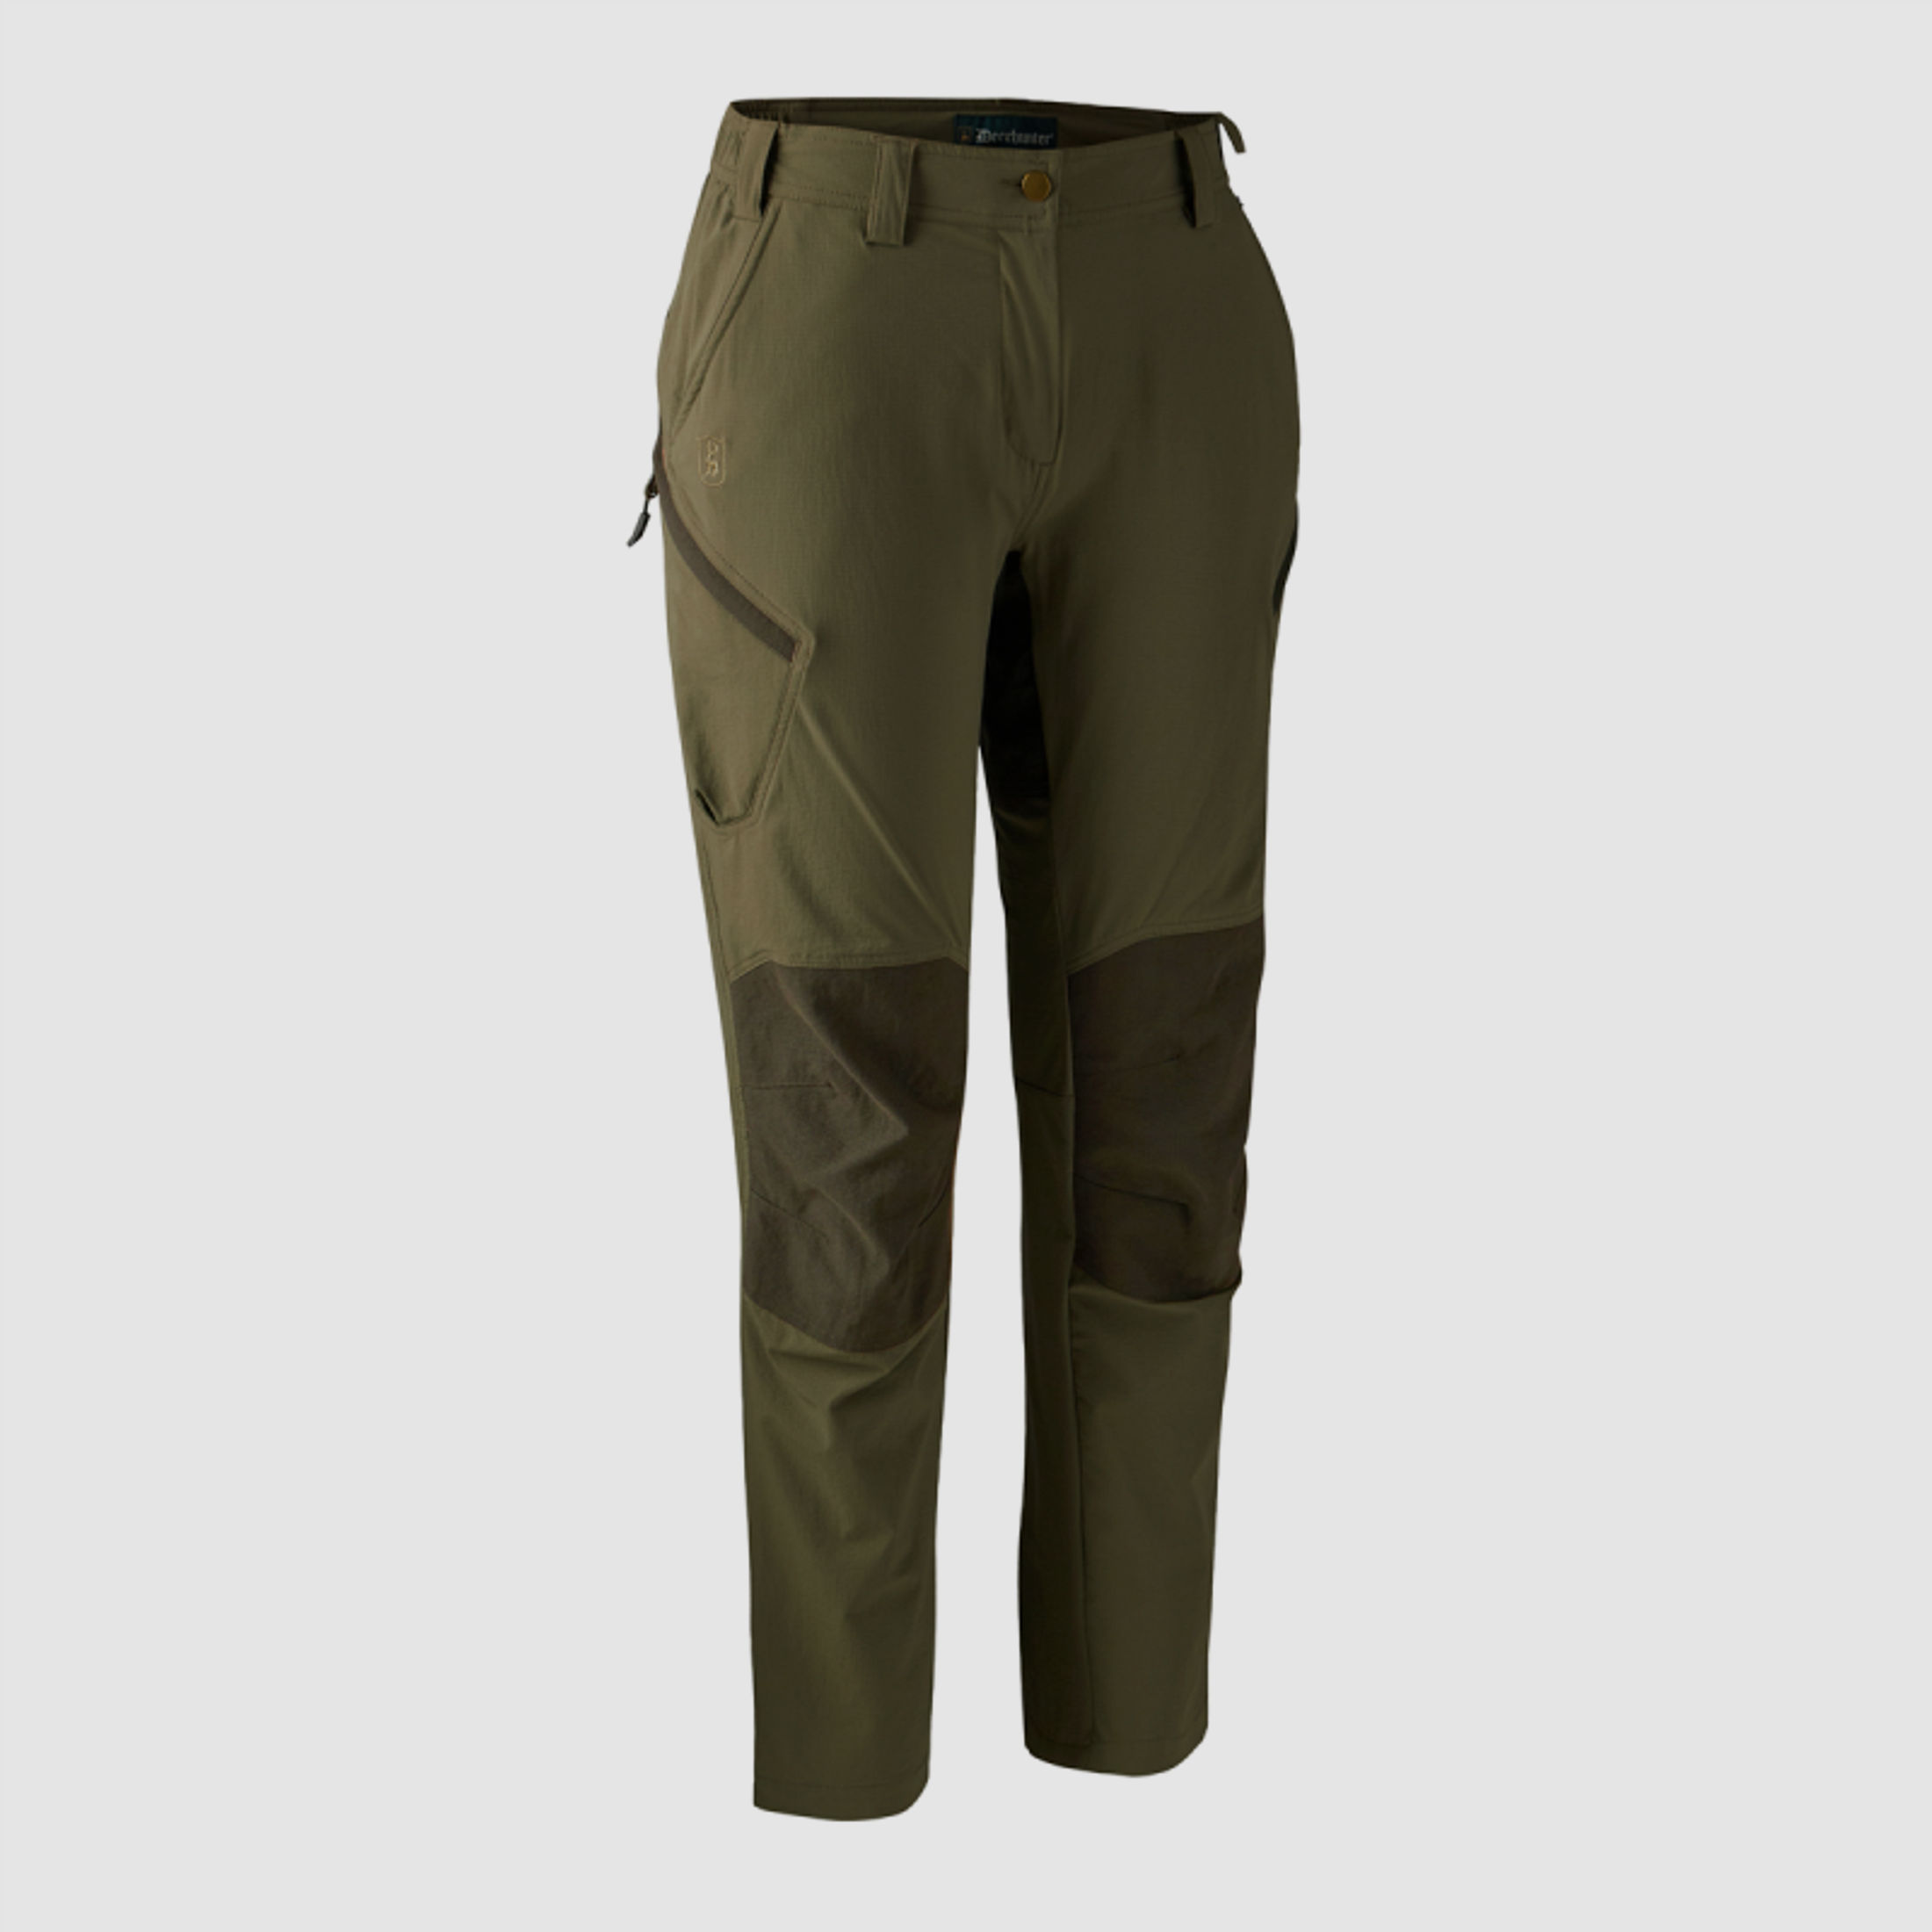 Deerhunter Damen Hose Lady Anti-Insect mit HHL Behandlung Capers